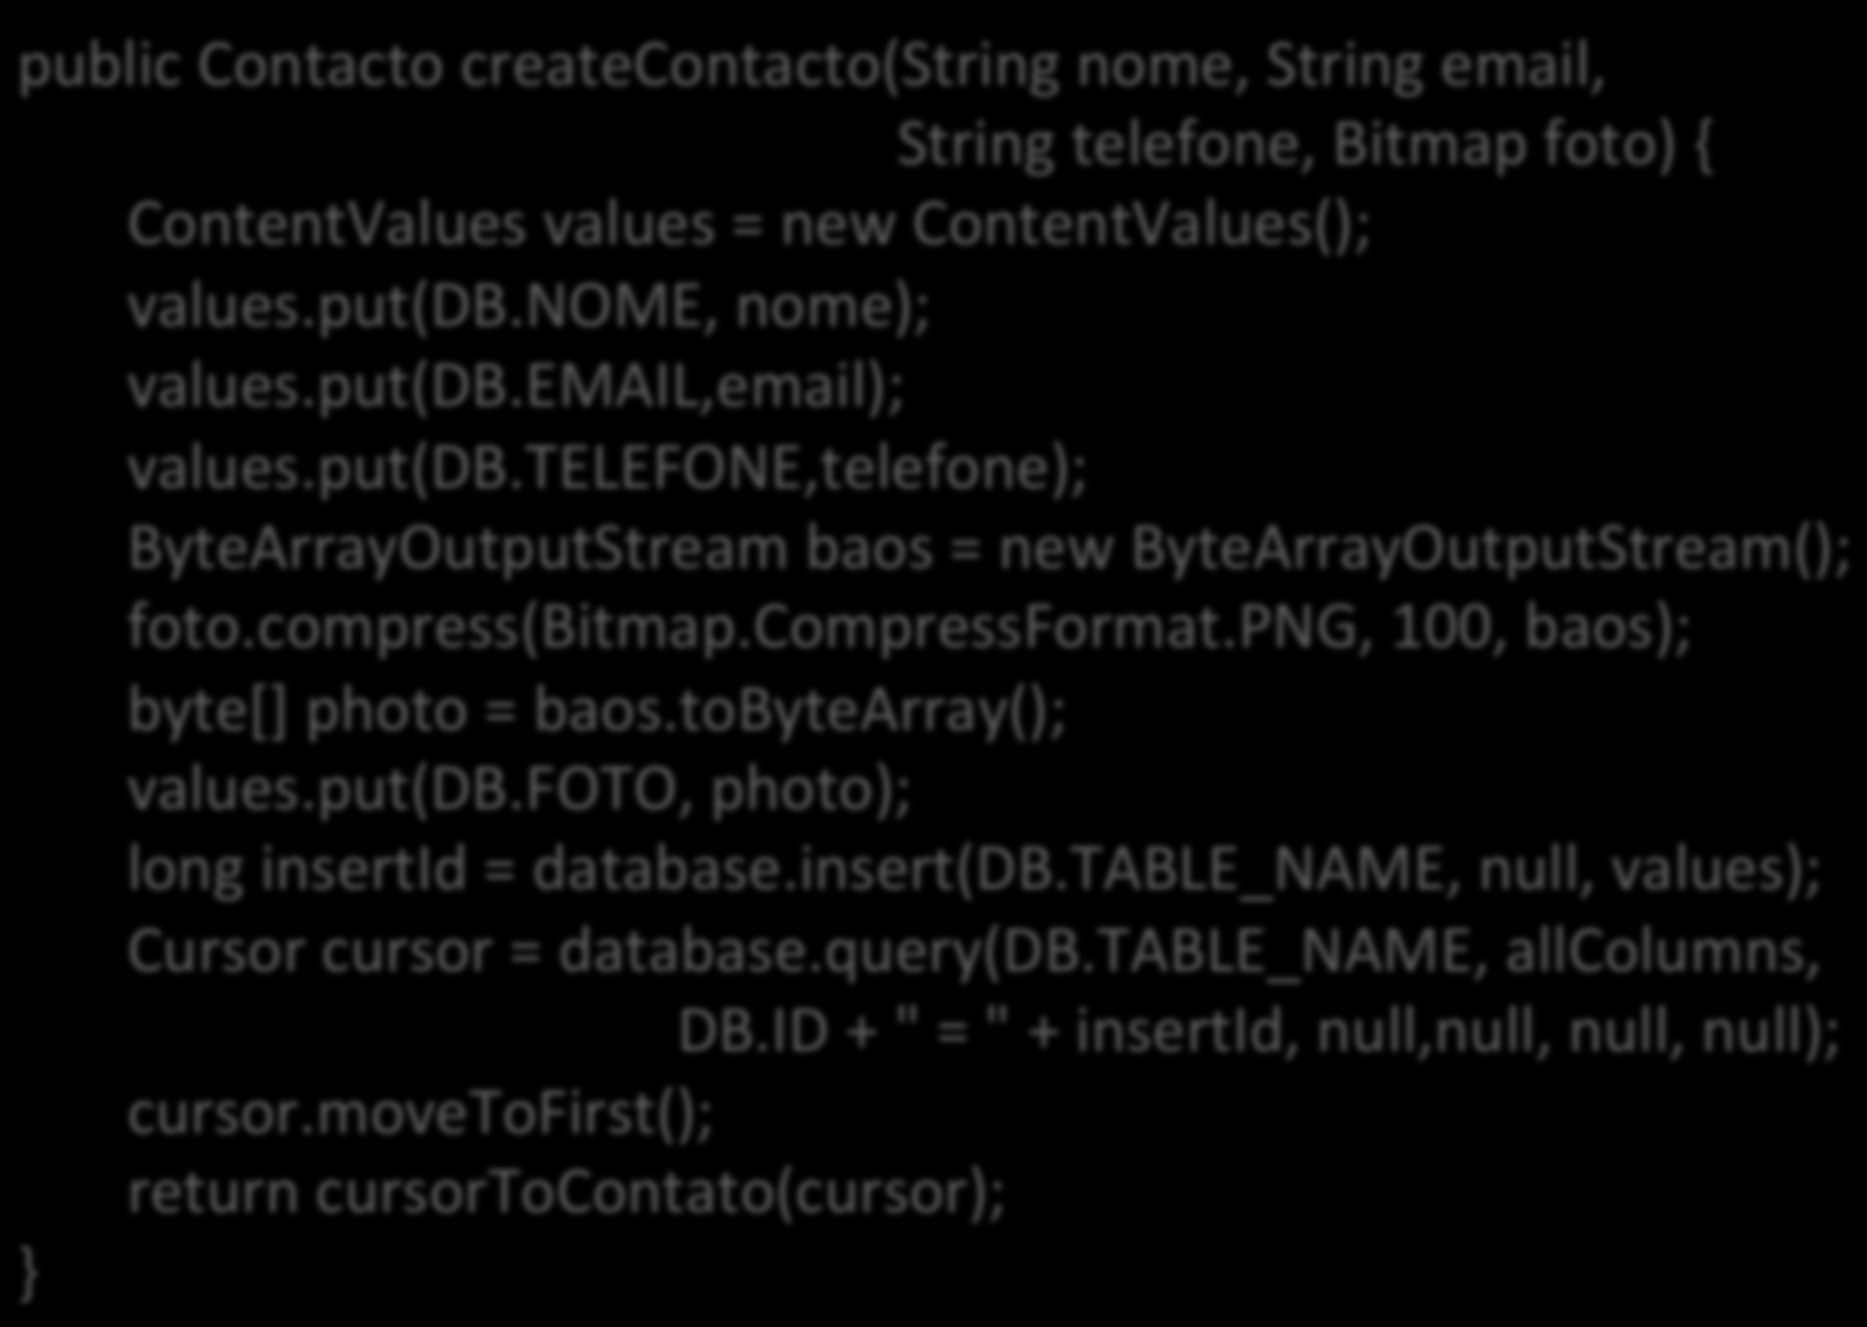 public Contacto createcontacto(string nome, String email, String telefone, Bitmap foto) { ContentValues values = new ContentValues(); values.put(db.nome, nome); values.put(db.email,email); values.